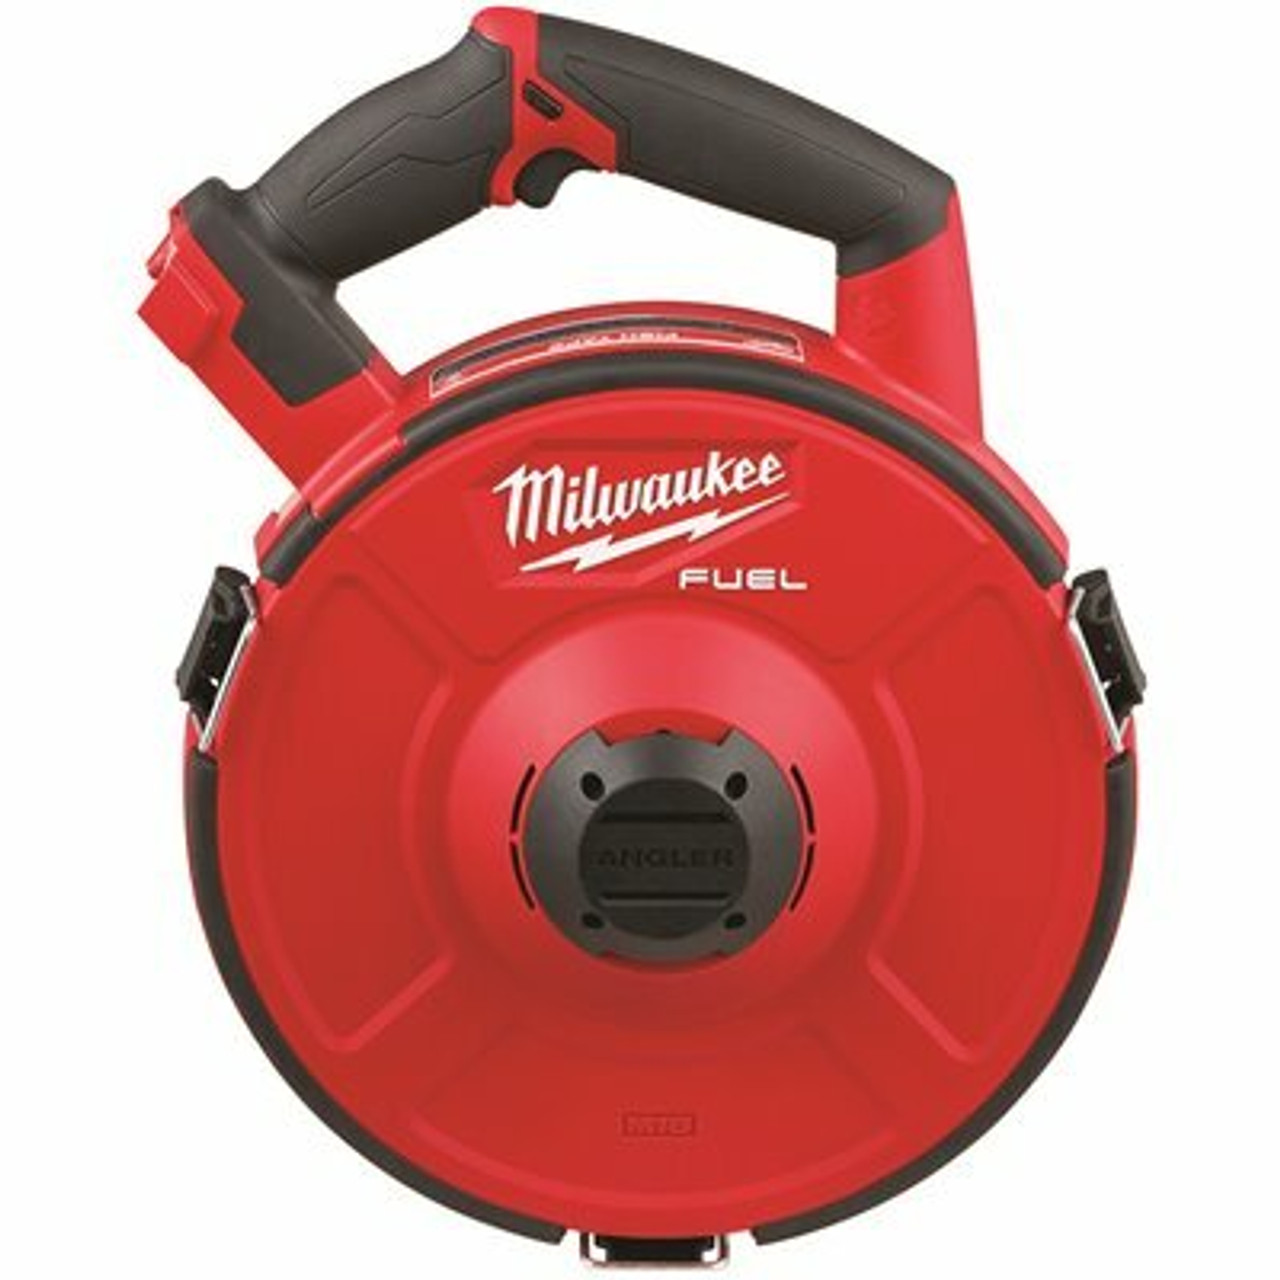 Milwaukee M18 Fuel 18-Volt Lithium-Ion Cordless Angler Pulling Fish Tape Powered Base (Tool-Only)